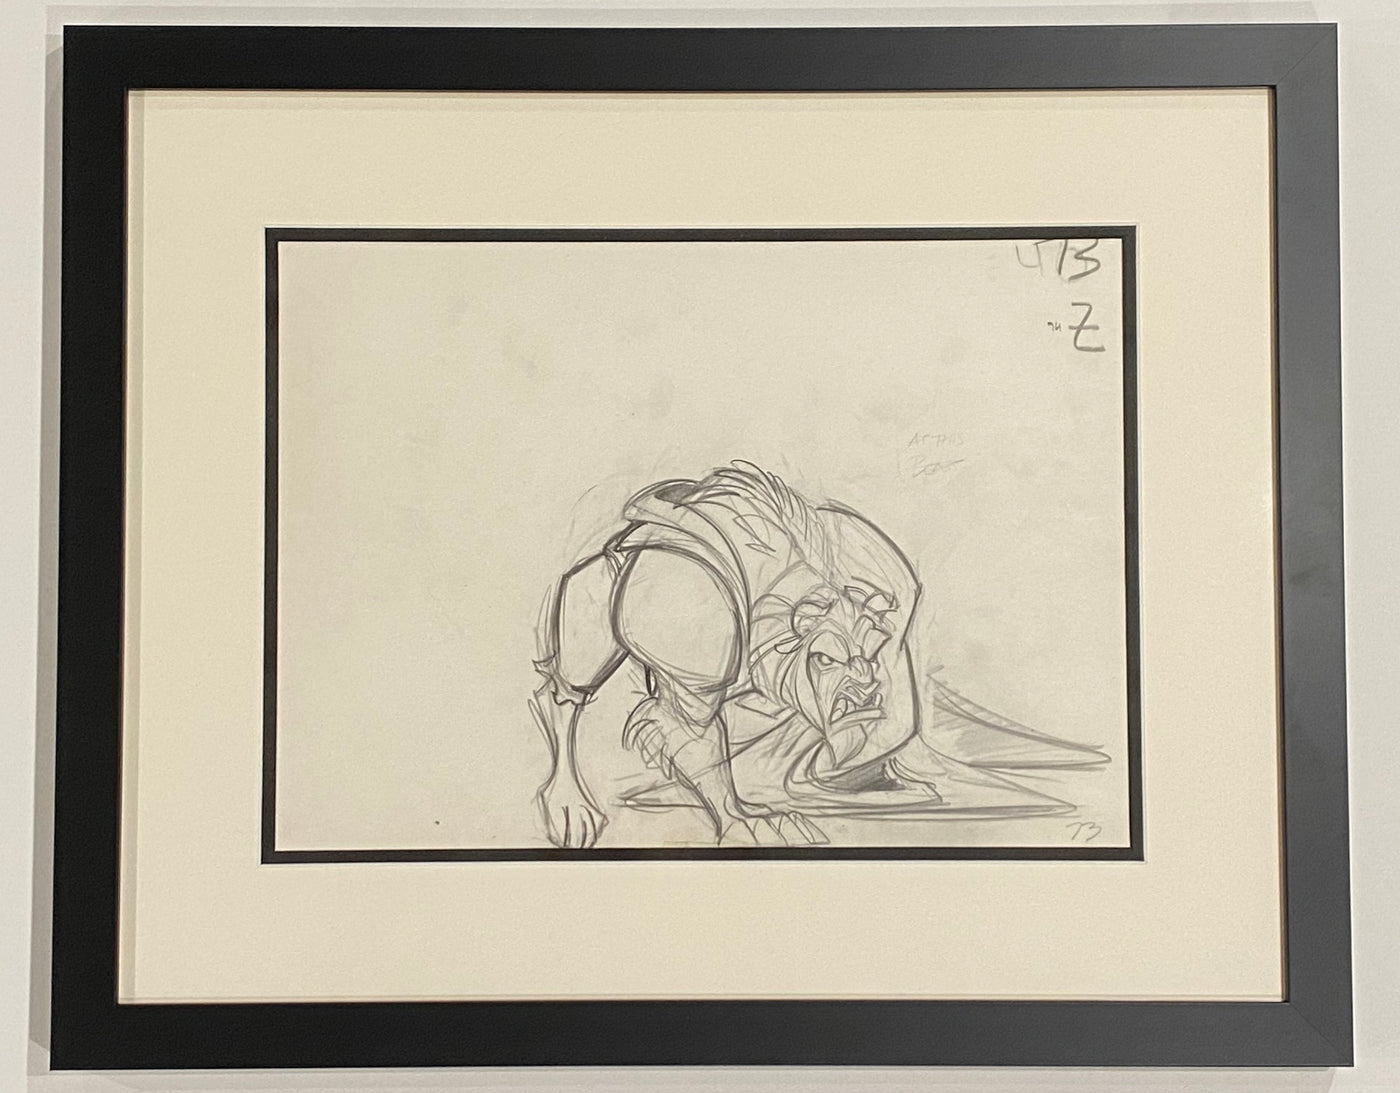 Original Walt Disney Production Drawing from Beauty and the Beast